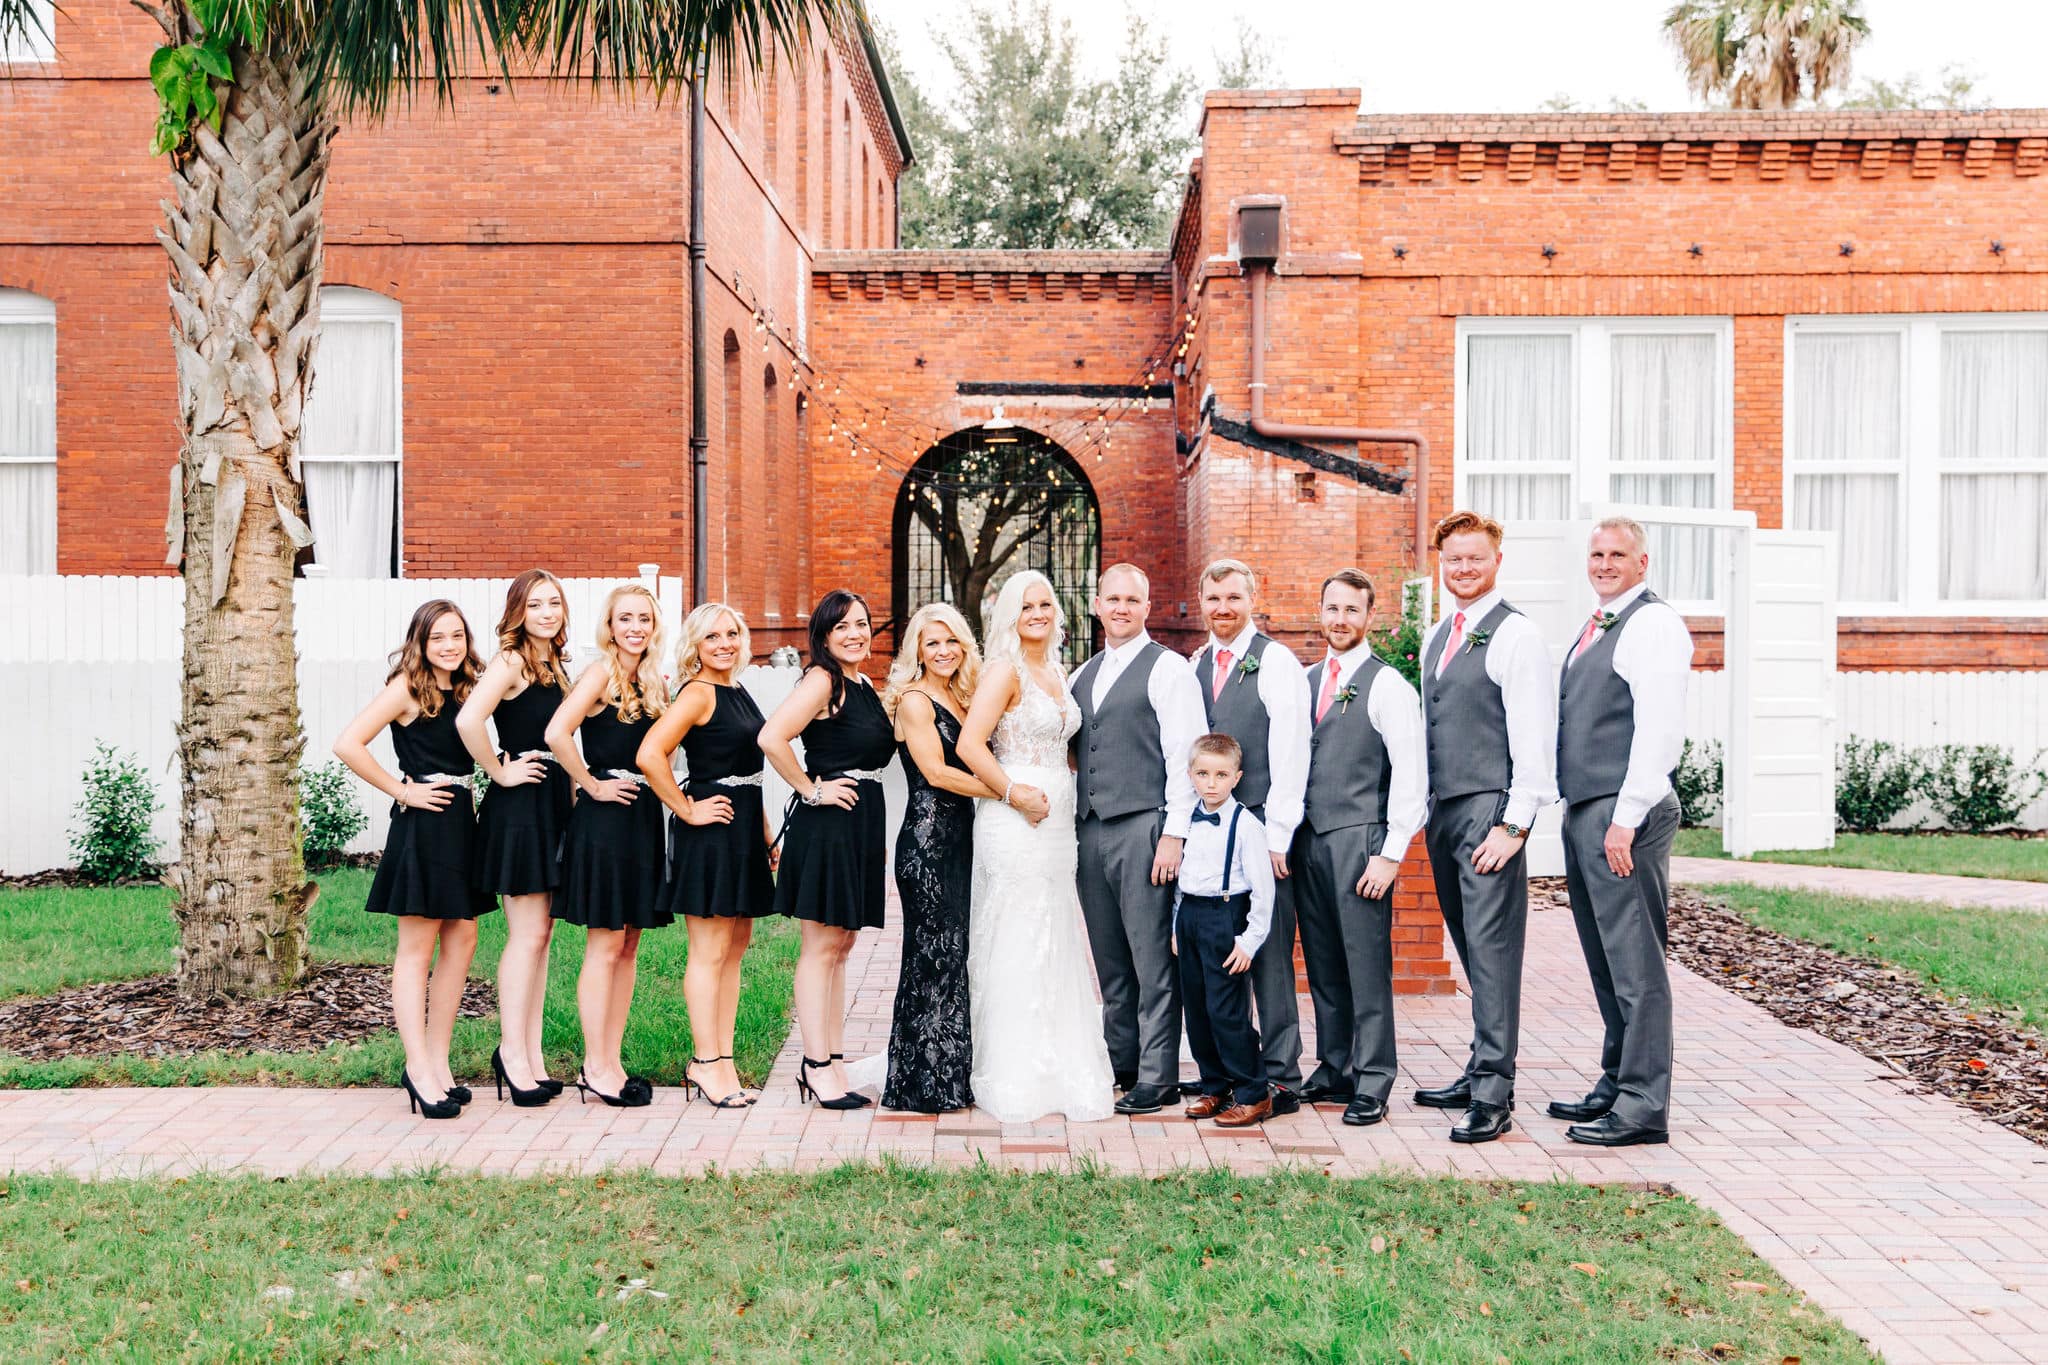 bride and groom with bridesmaids with black dresses with groomsmen with grey suits with large red brick building in background at Venue 1902 Wedding